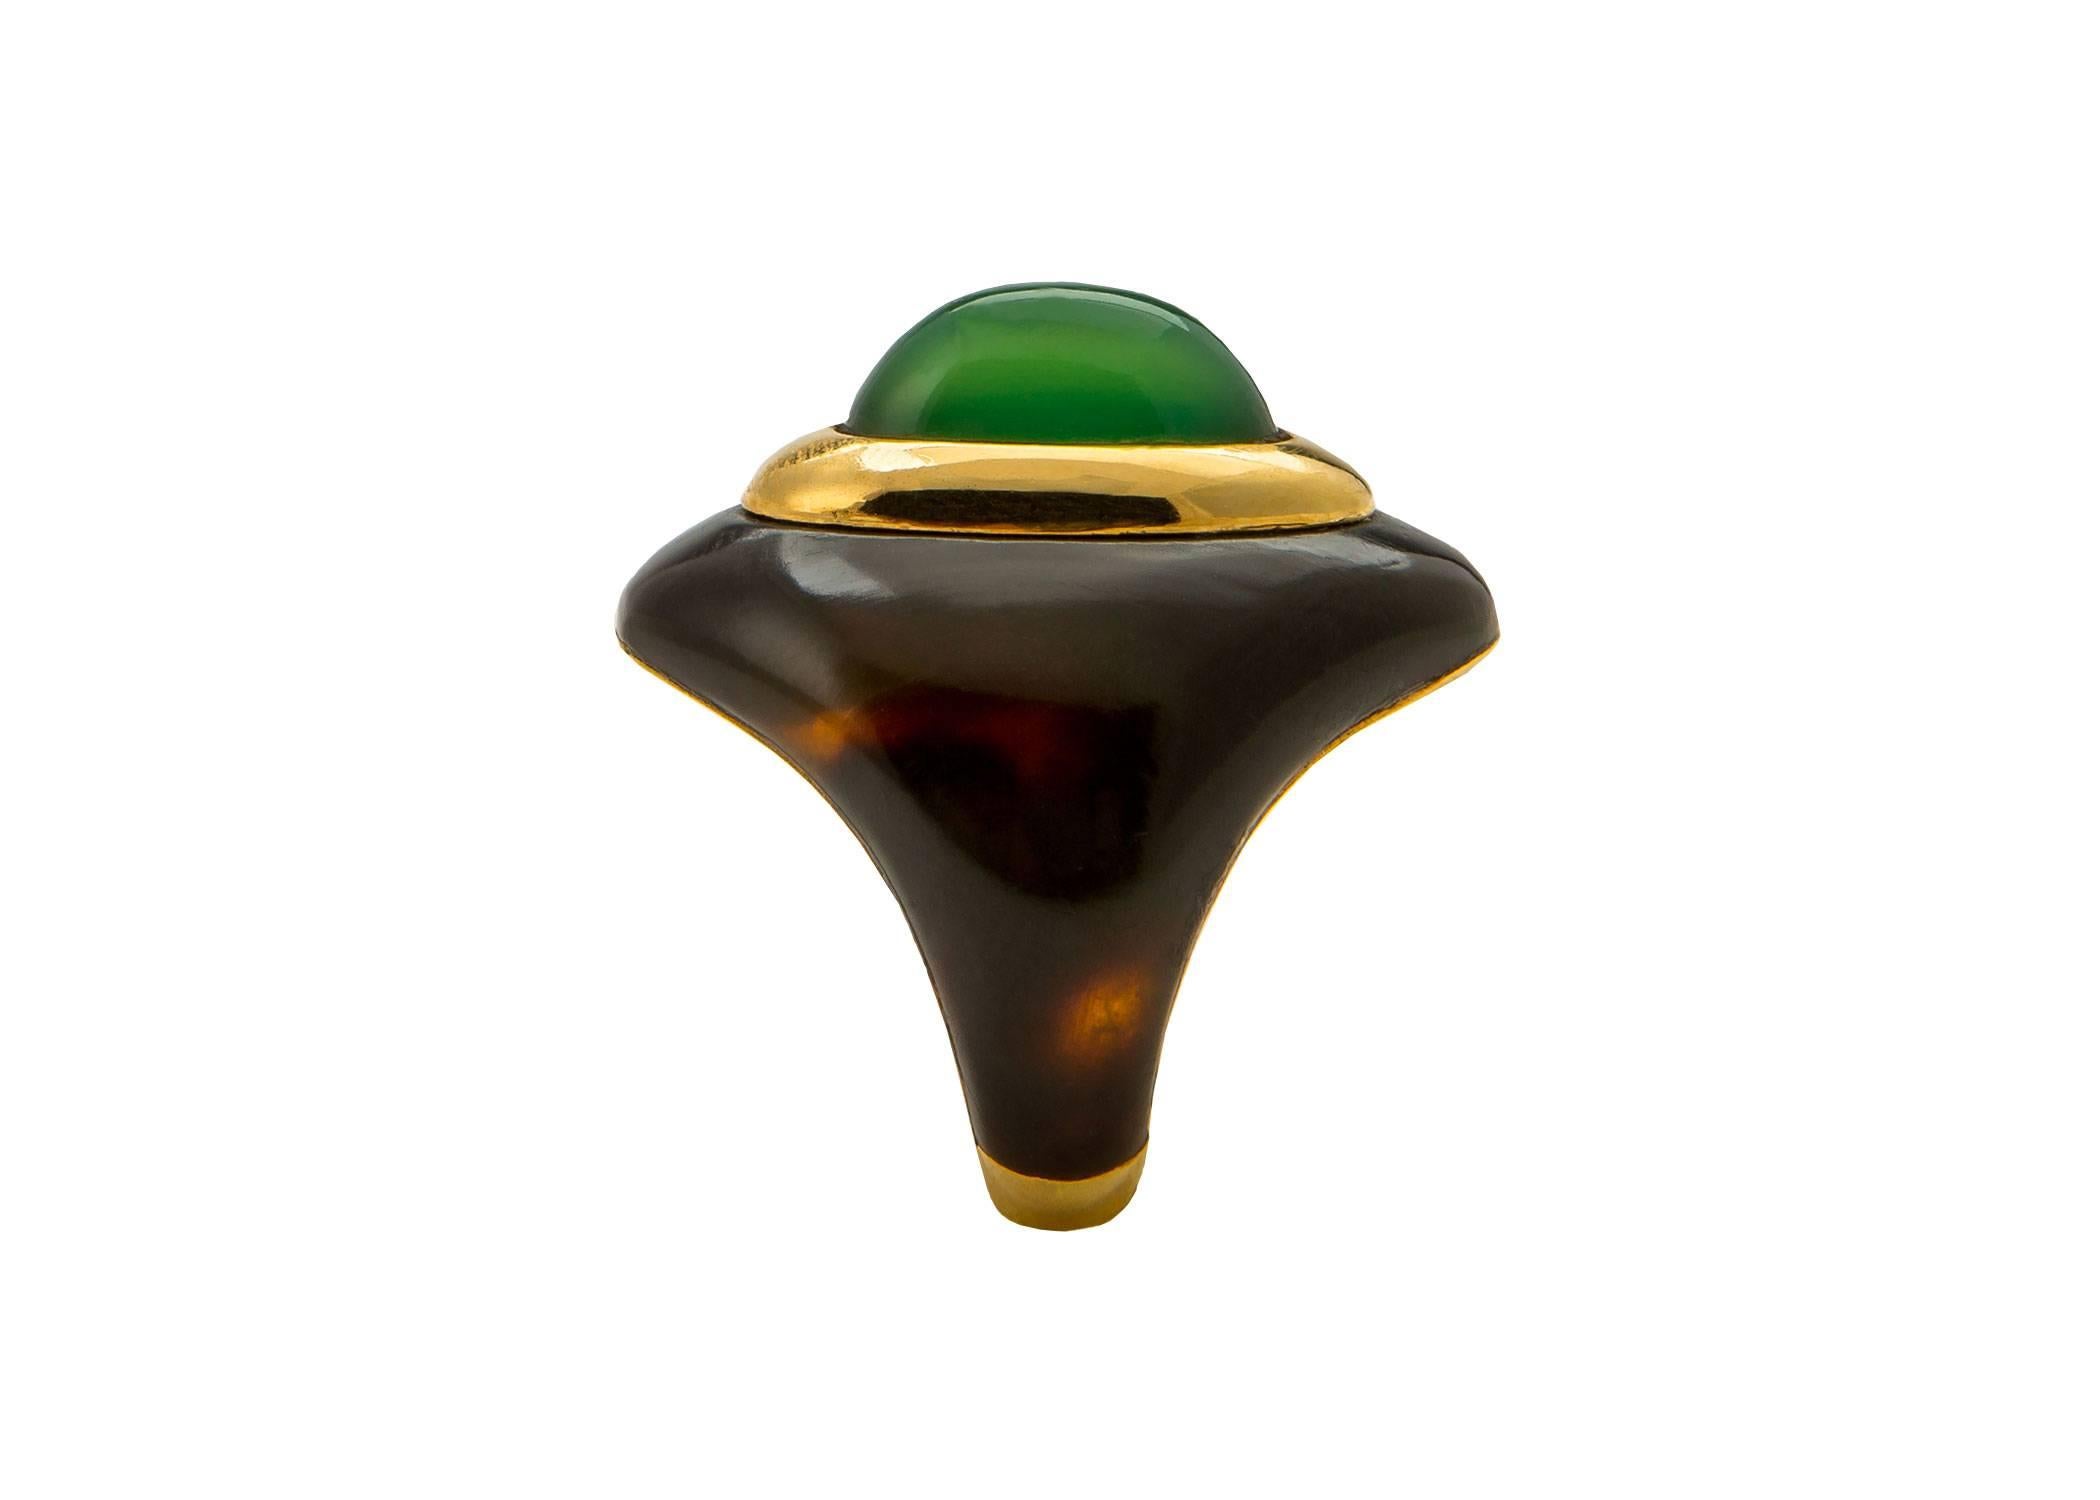 A rare opportunity. This Boucheron Paris ring with maker's mark and French assay mark could not be made today. A lush combination of rich translucent tortoise shell and vivid green chrysoprase create a chic statement piece. Approximately 1 1/8